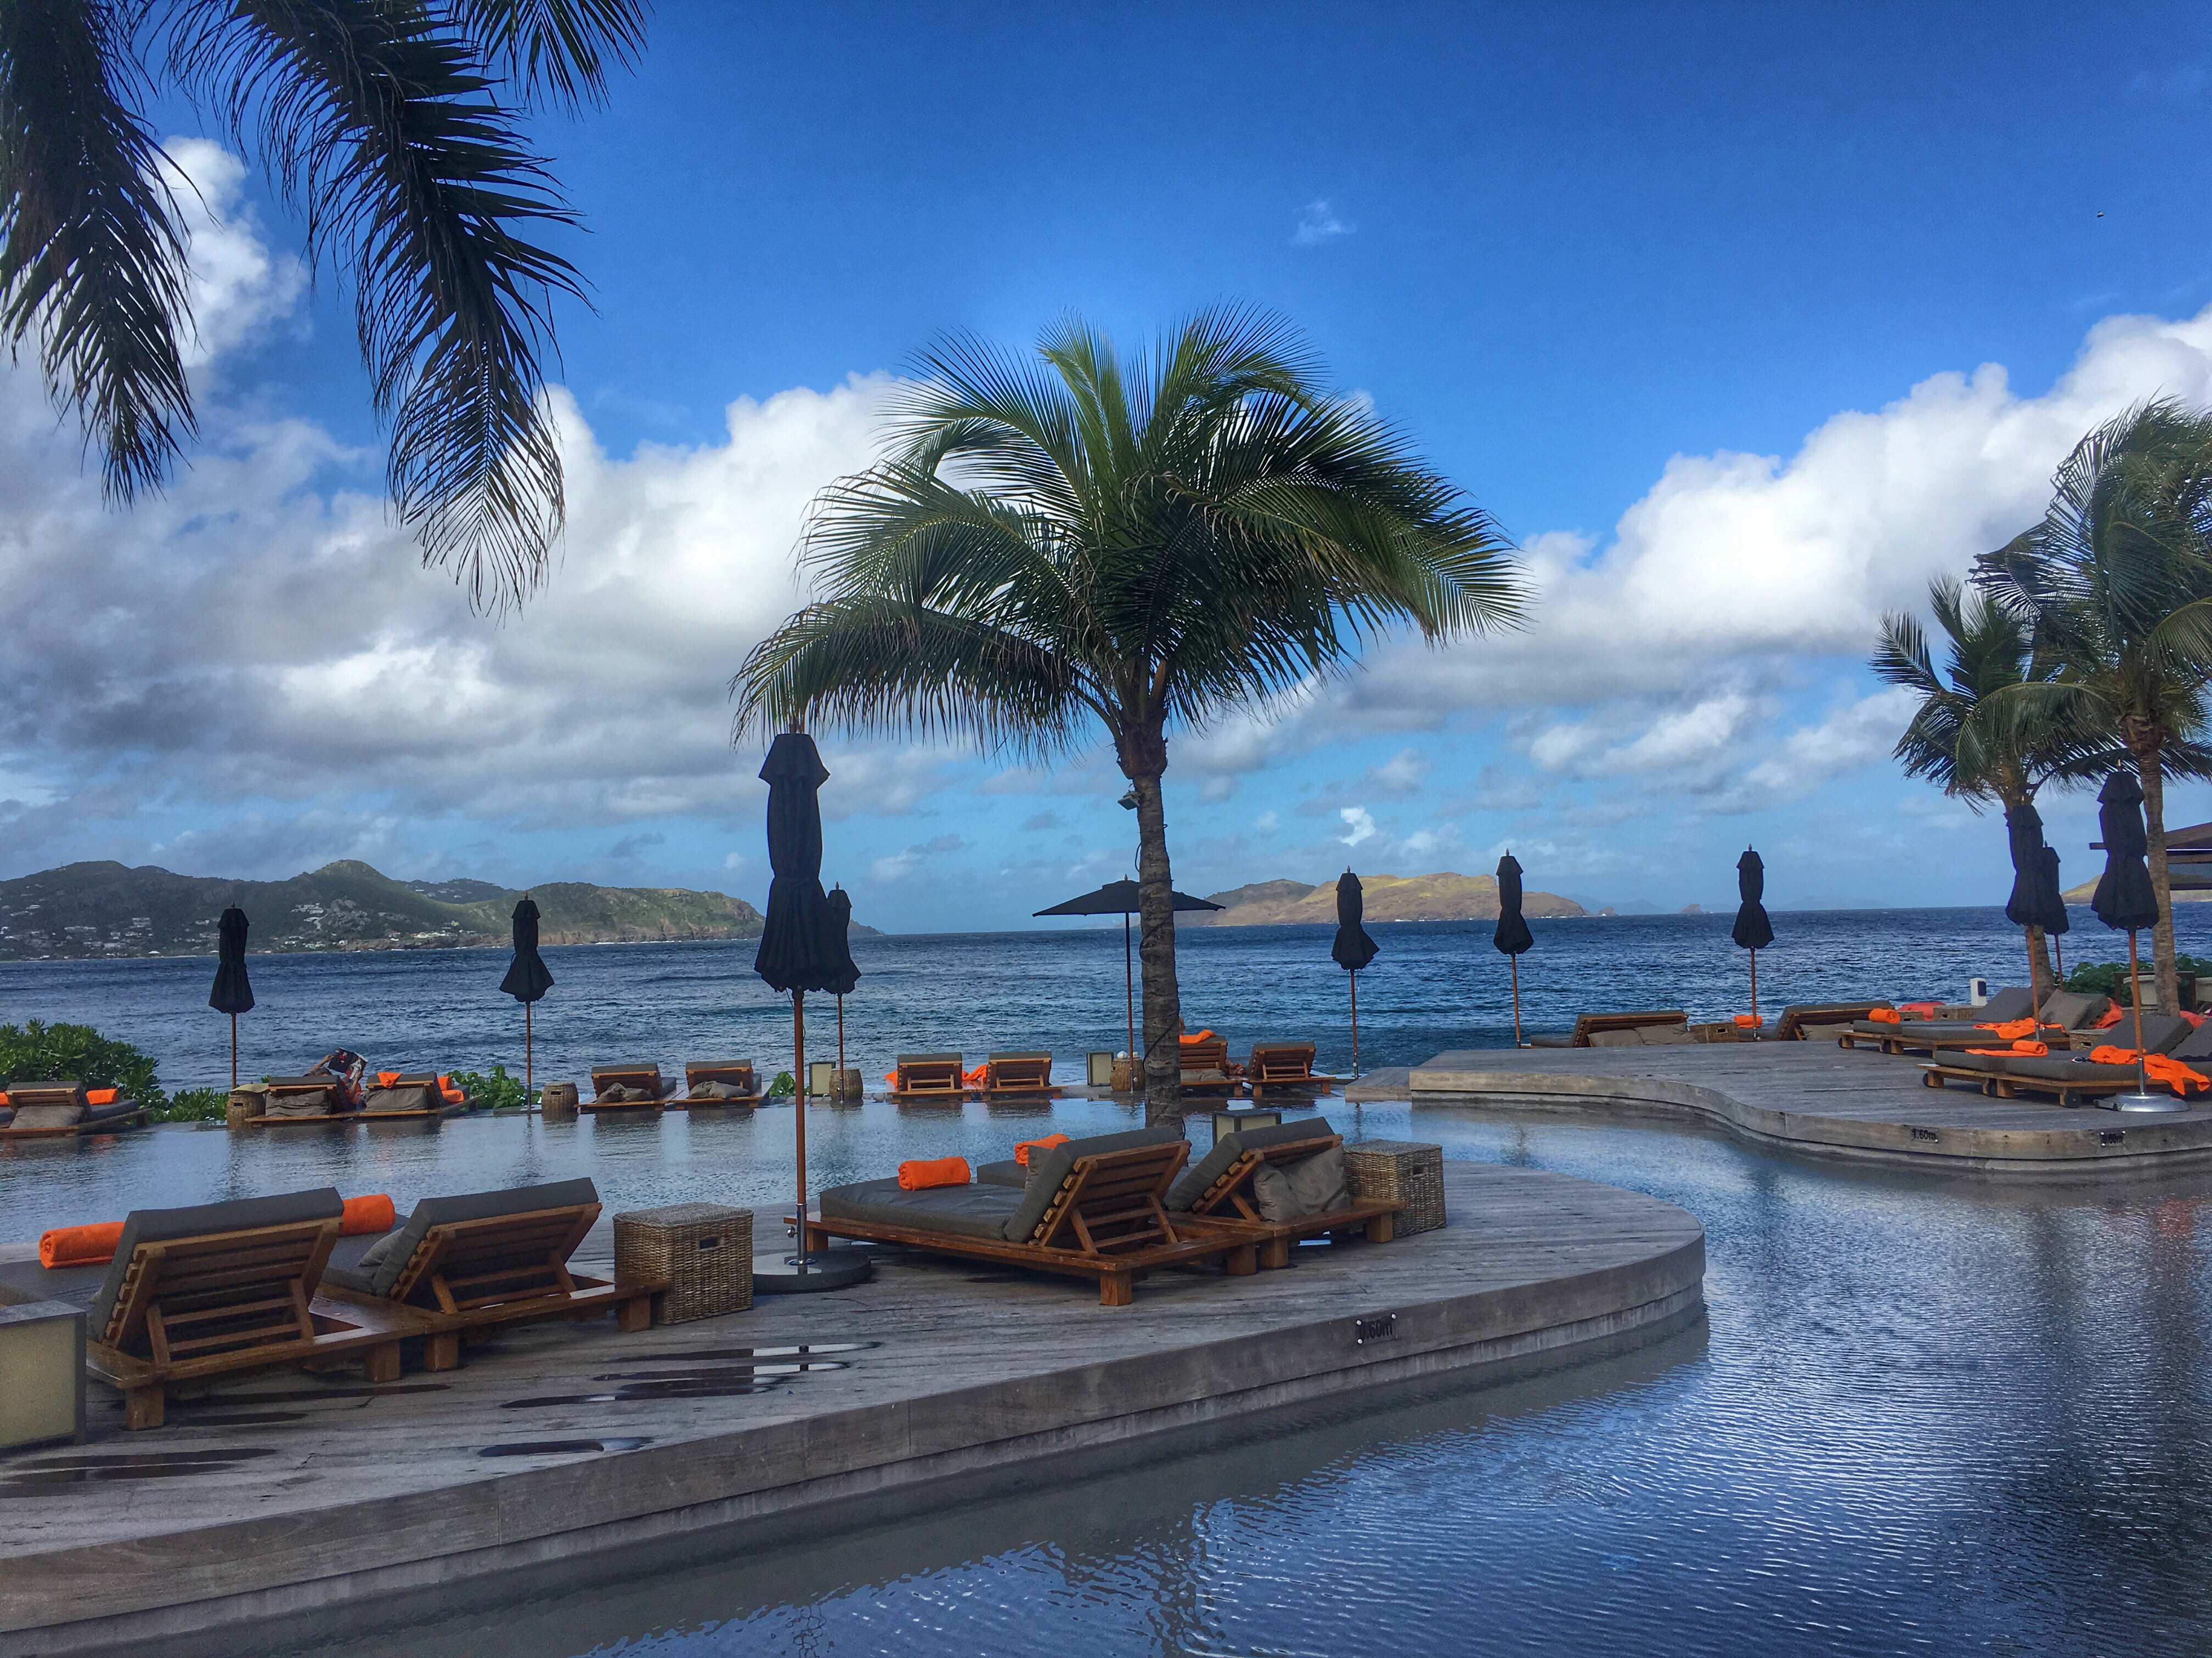 Hotel Christopher - St Barths Guide